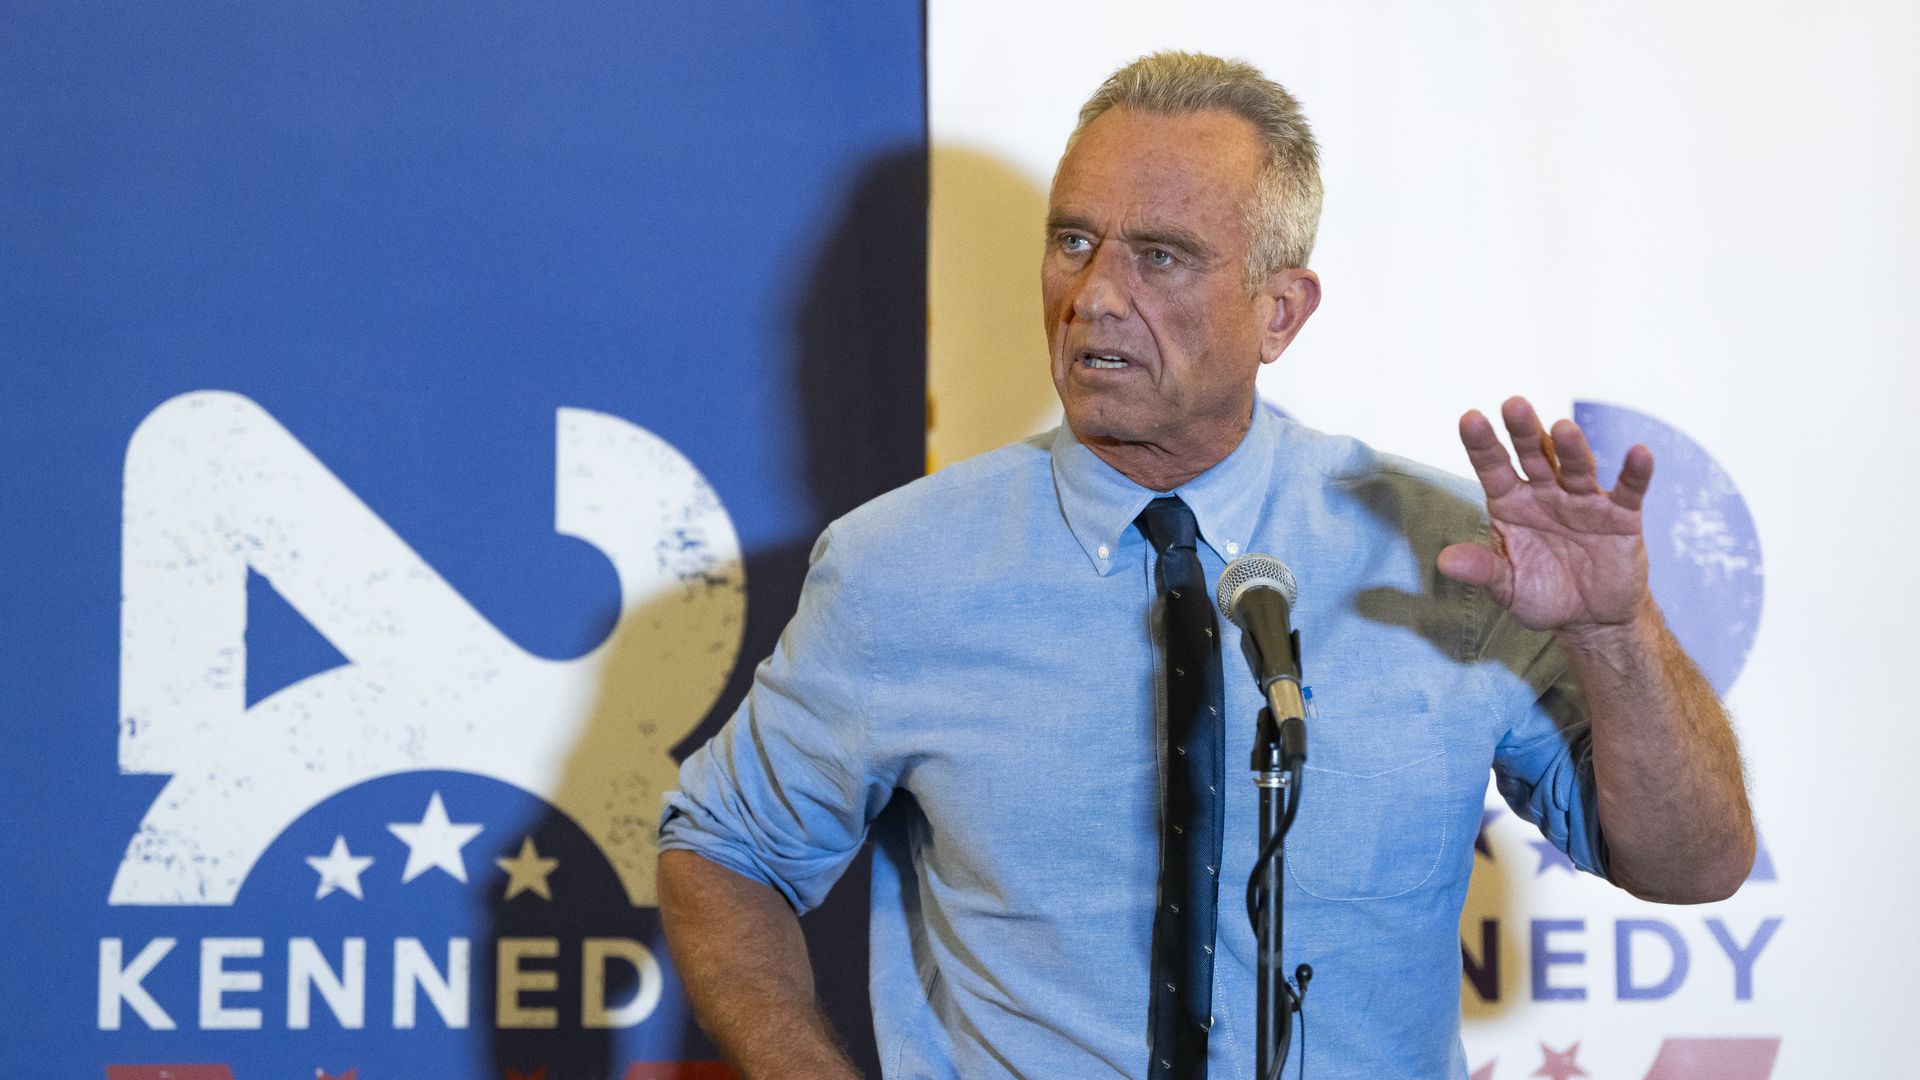 Robert F. Kennedy Jr. takes questions from media after his campaign rally at Legends Event Center on December 20,